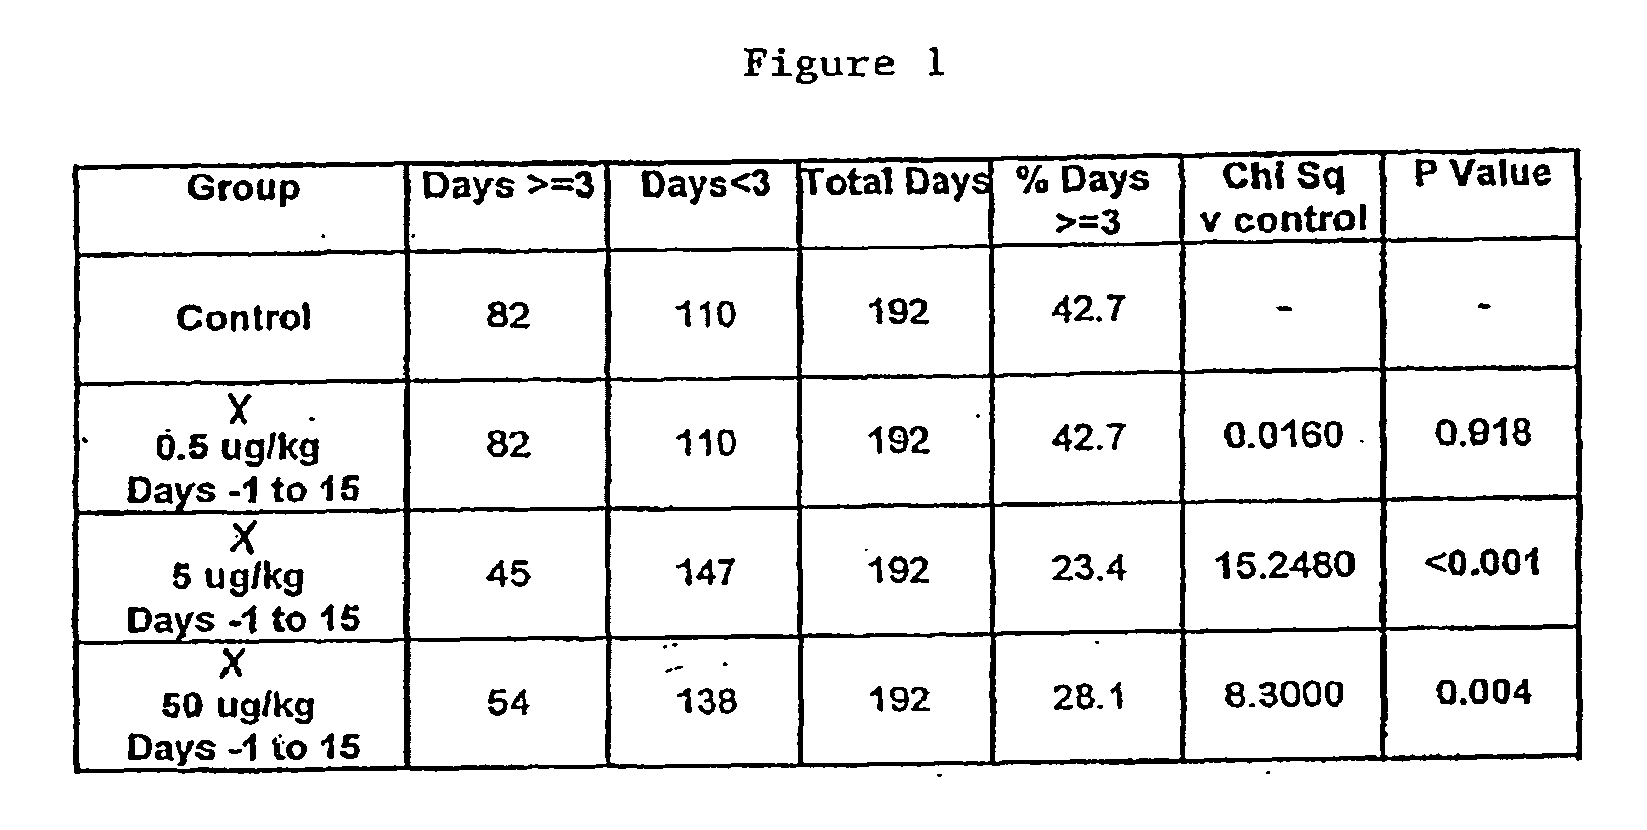 Compositions and methods for the treatment of mucositis